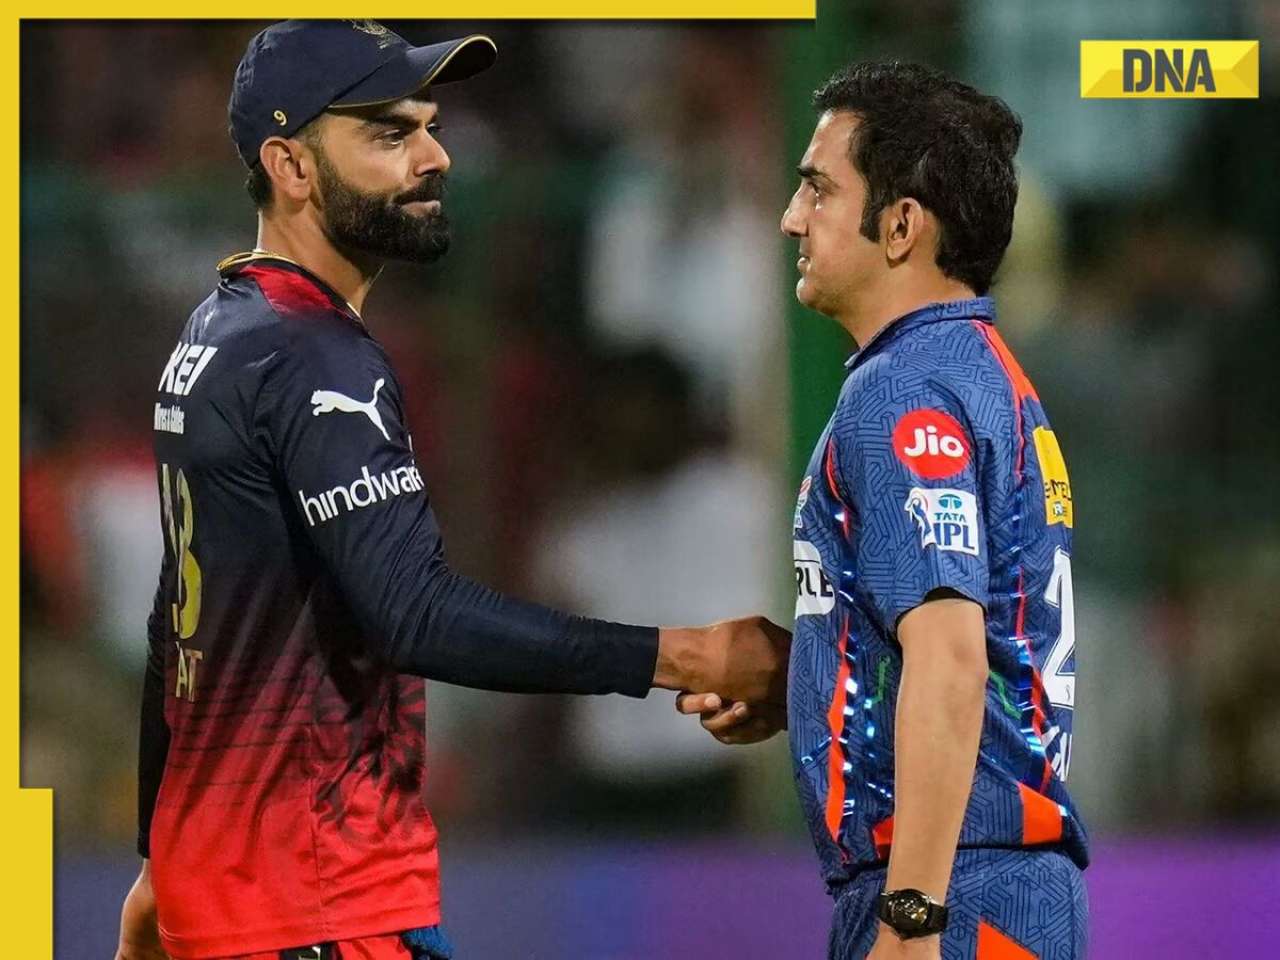 'Wanted to beat every time....': Gautam Gambhir's old video goes viral ahead of RCB vs KKR IPL clash